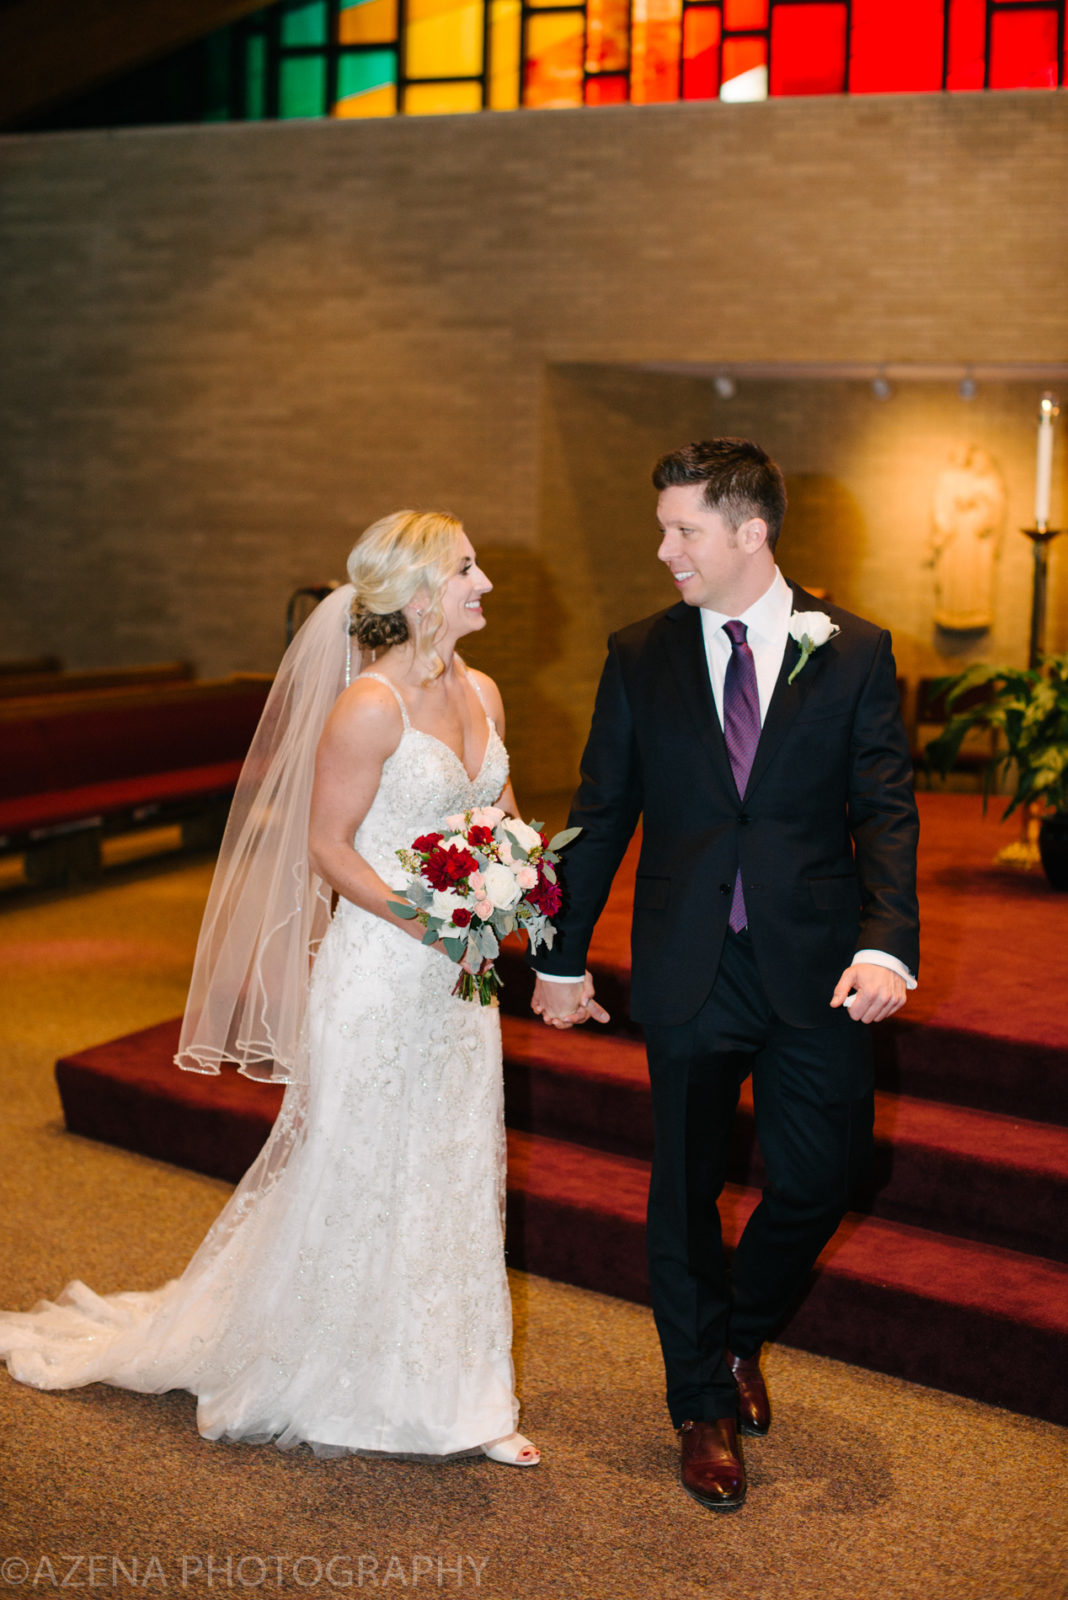 Bride and Groom walking together in church